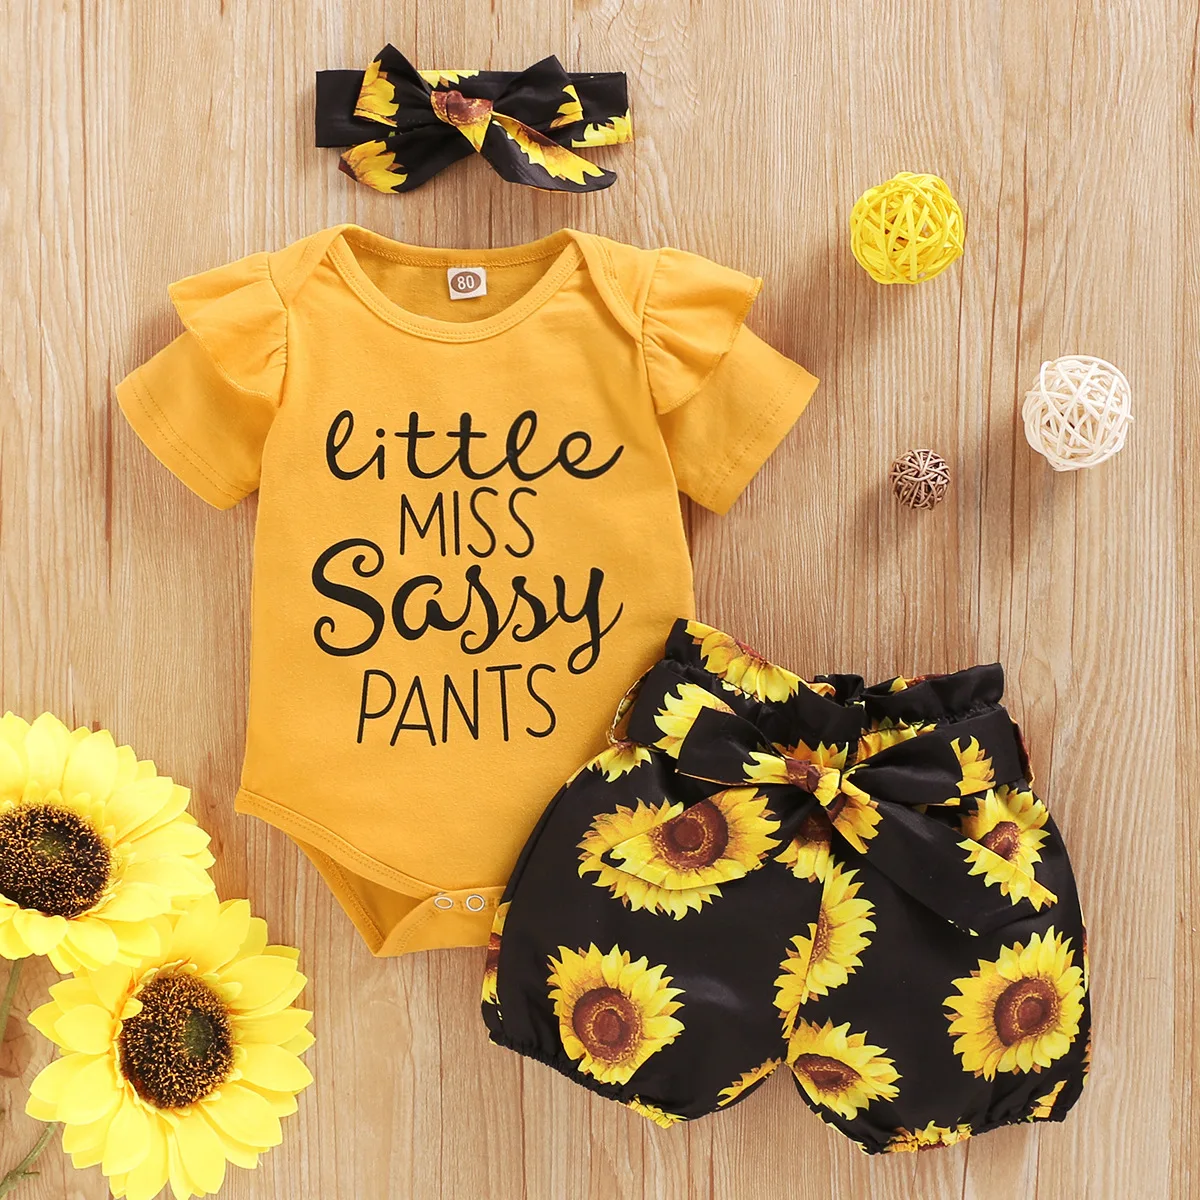 Personalized baby gift Baby name Navy  Sunflower Floral Print Coming Home Outfit baby girl outfit newborn outfit custom baby gift